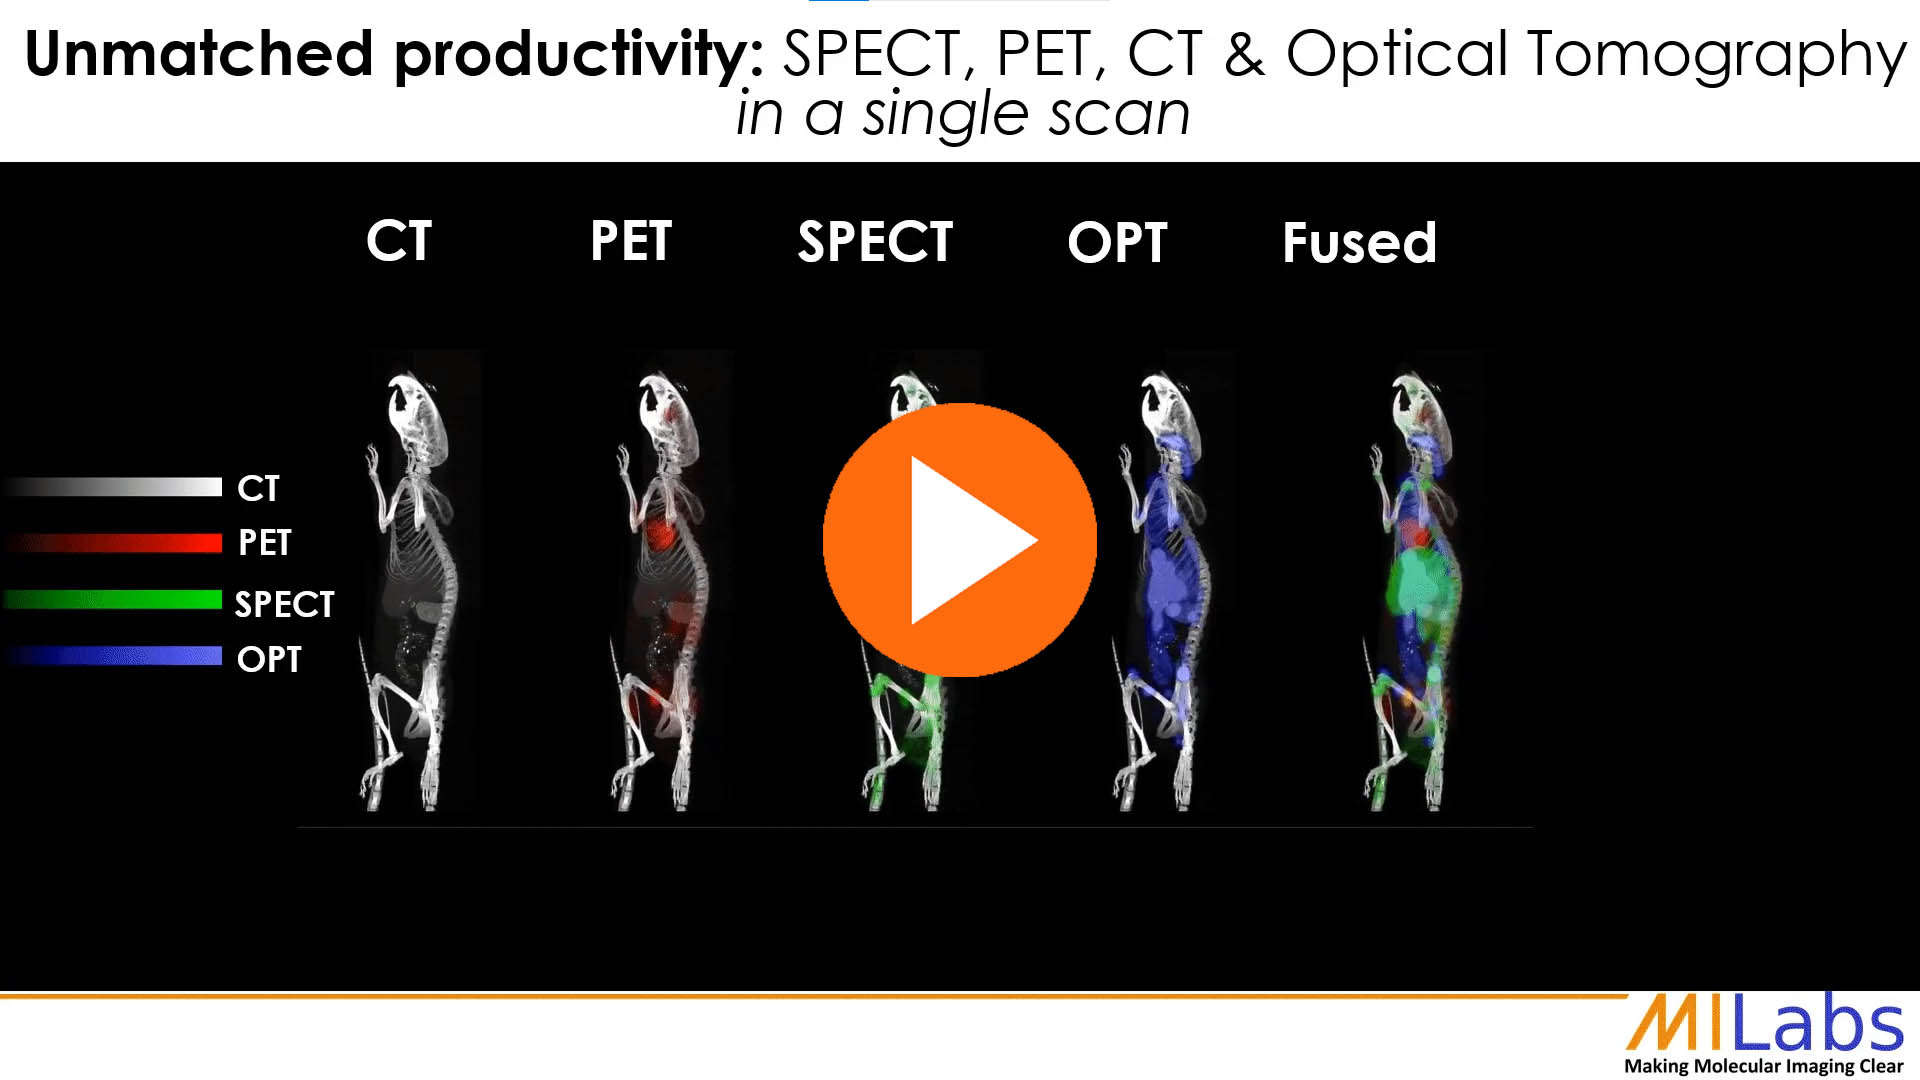 paralel preclinical SPECT PET Optical CT scan of a mouse